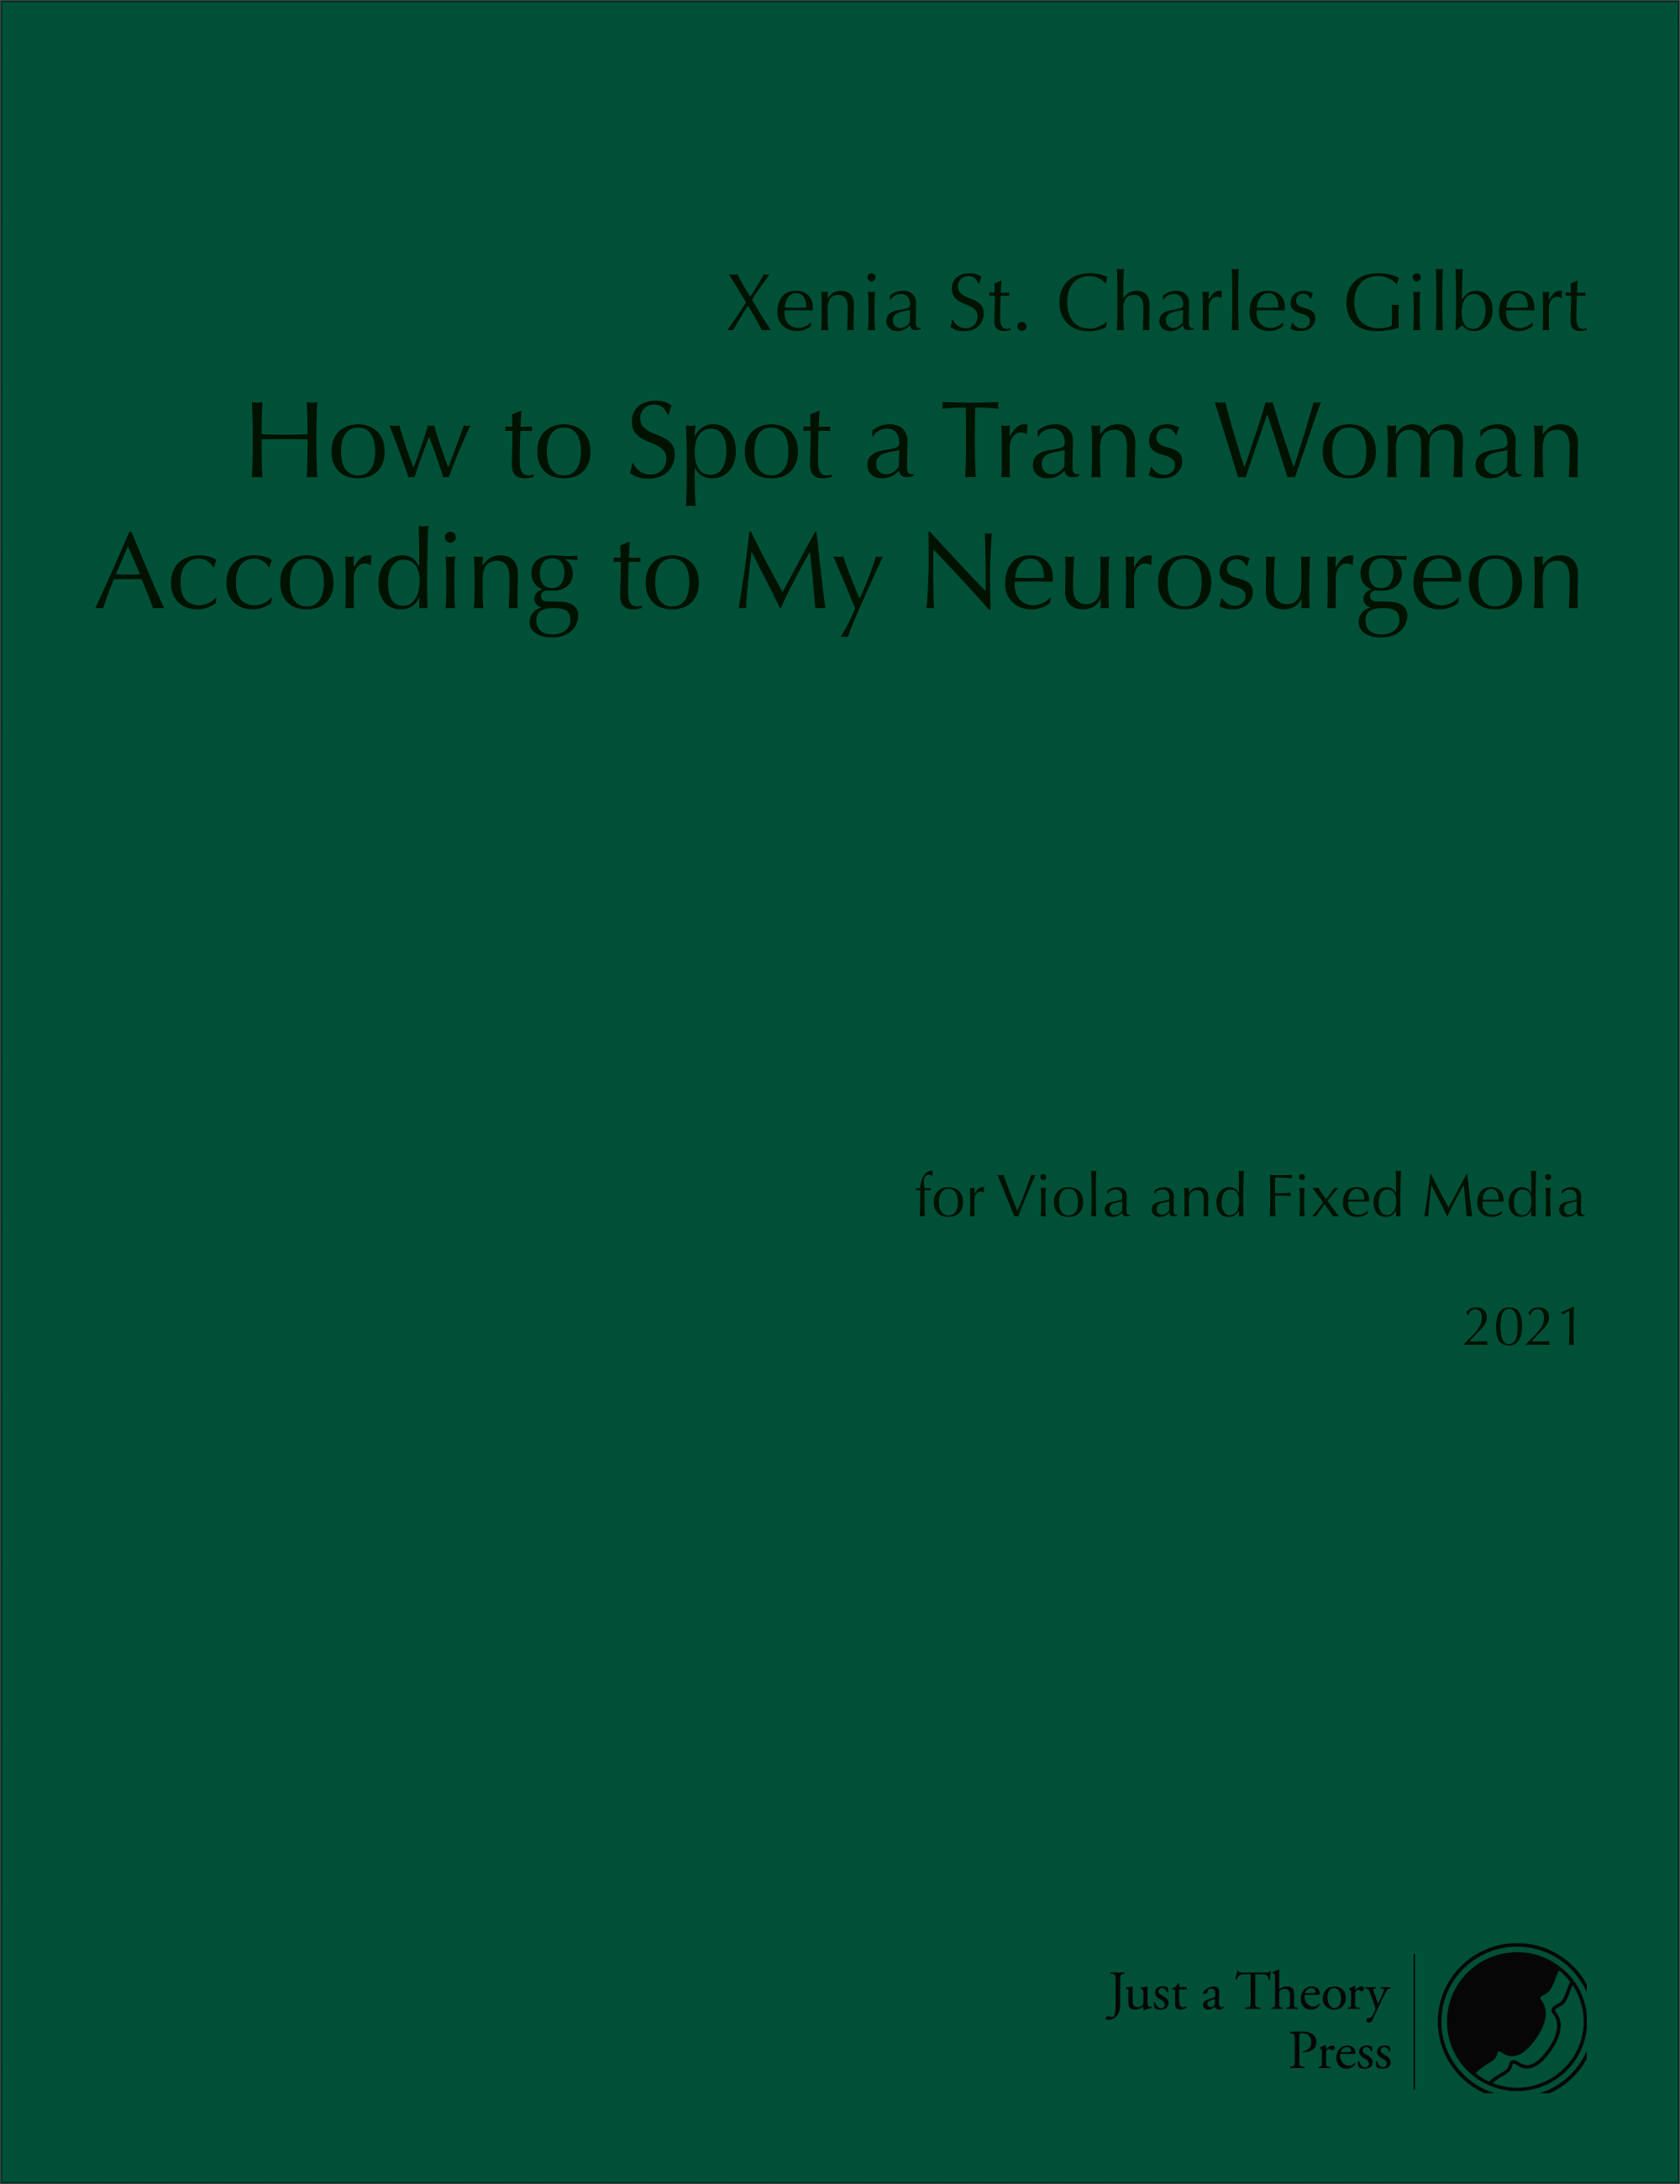 How to Spot a Trans Woman According to my Neurosurgeon